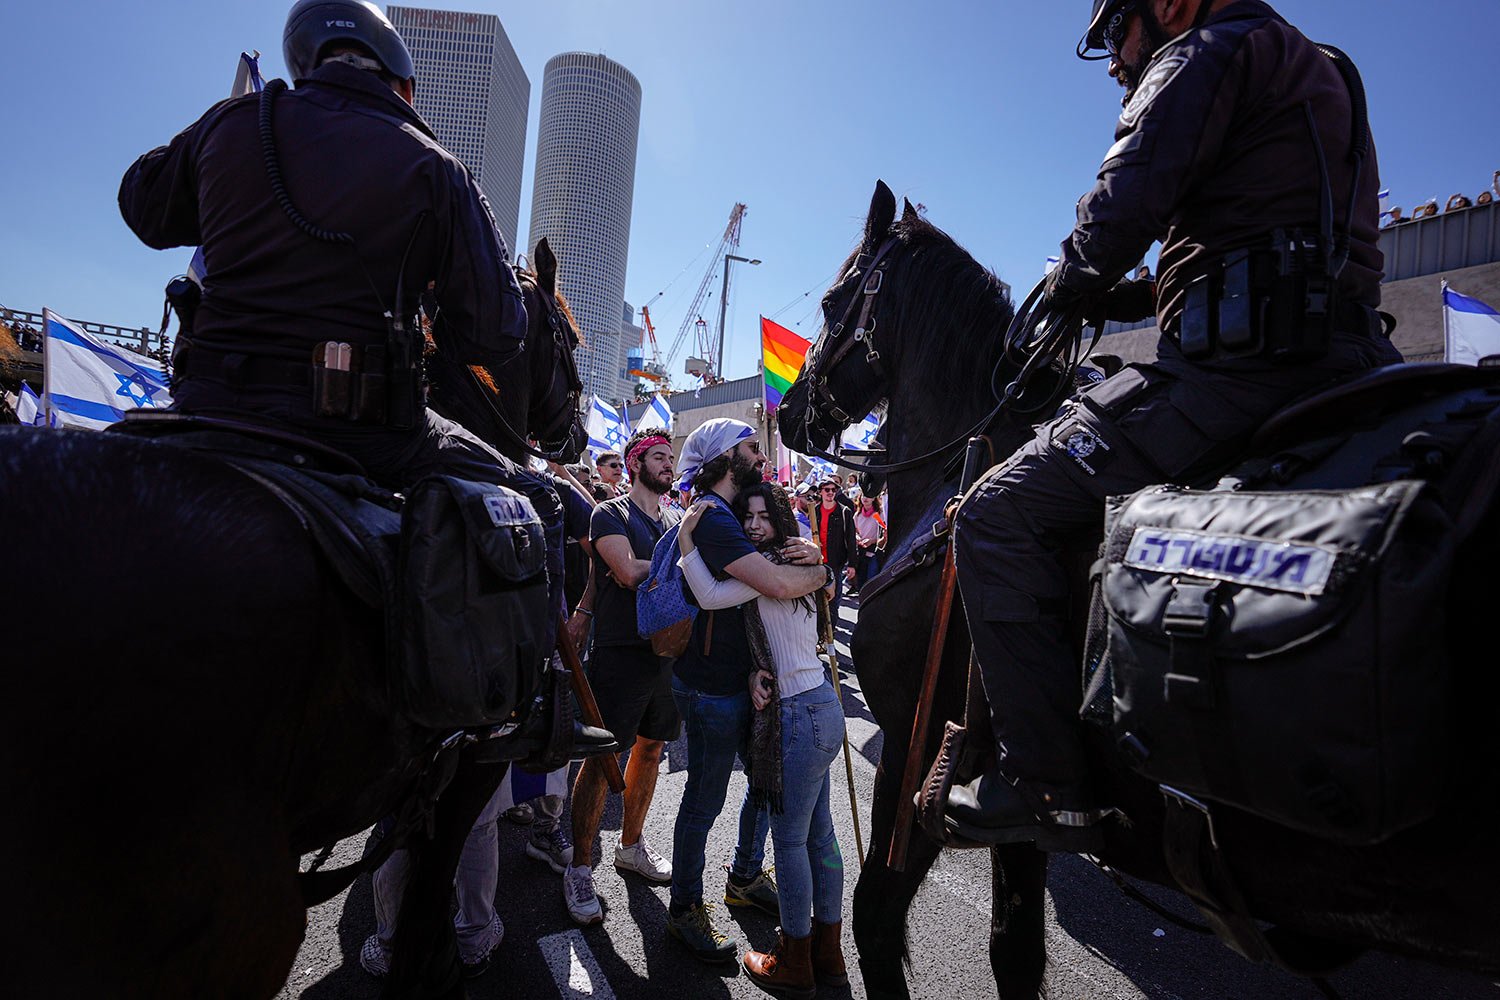  Two demonstrators hug as mounted police officers disperse people blocking a highway during a protest against plans by Prime Minister Benjamin Netanyahu's government to overhaul the Israel's judicial system in Tel Aviv, Israel, Thursday, March 16, 20